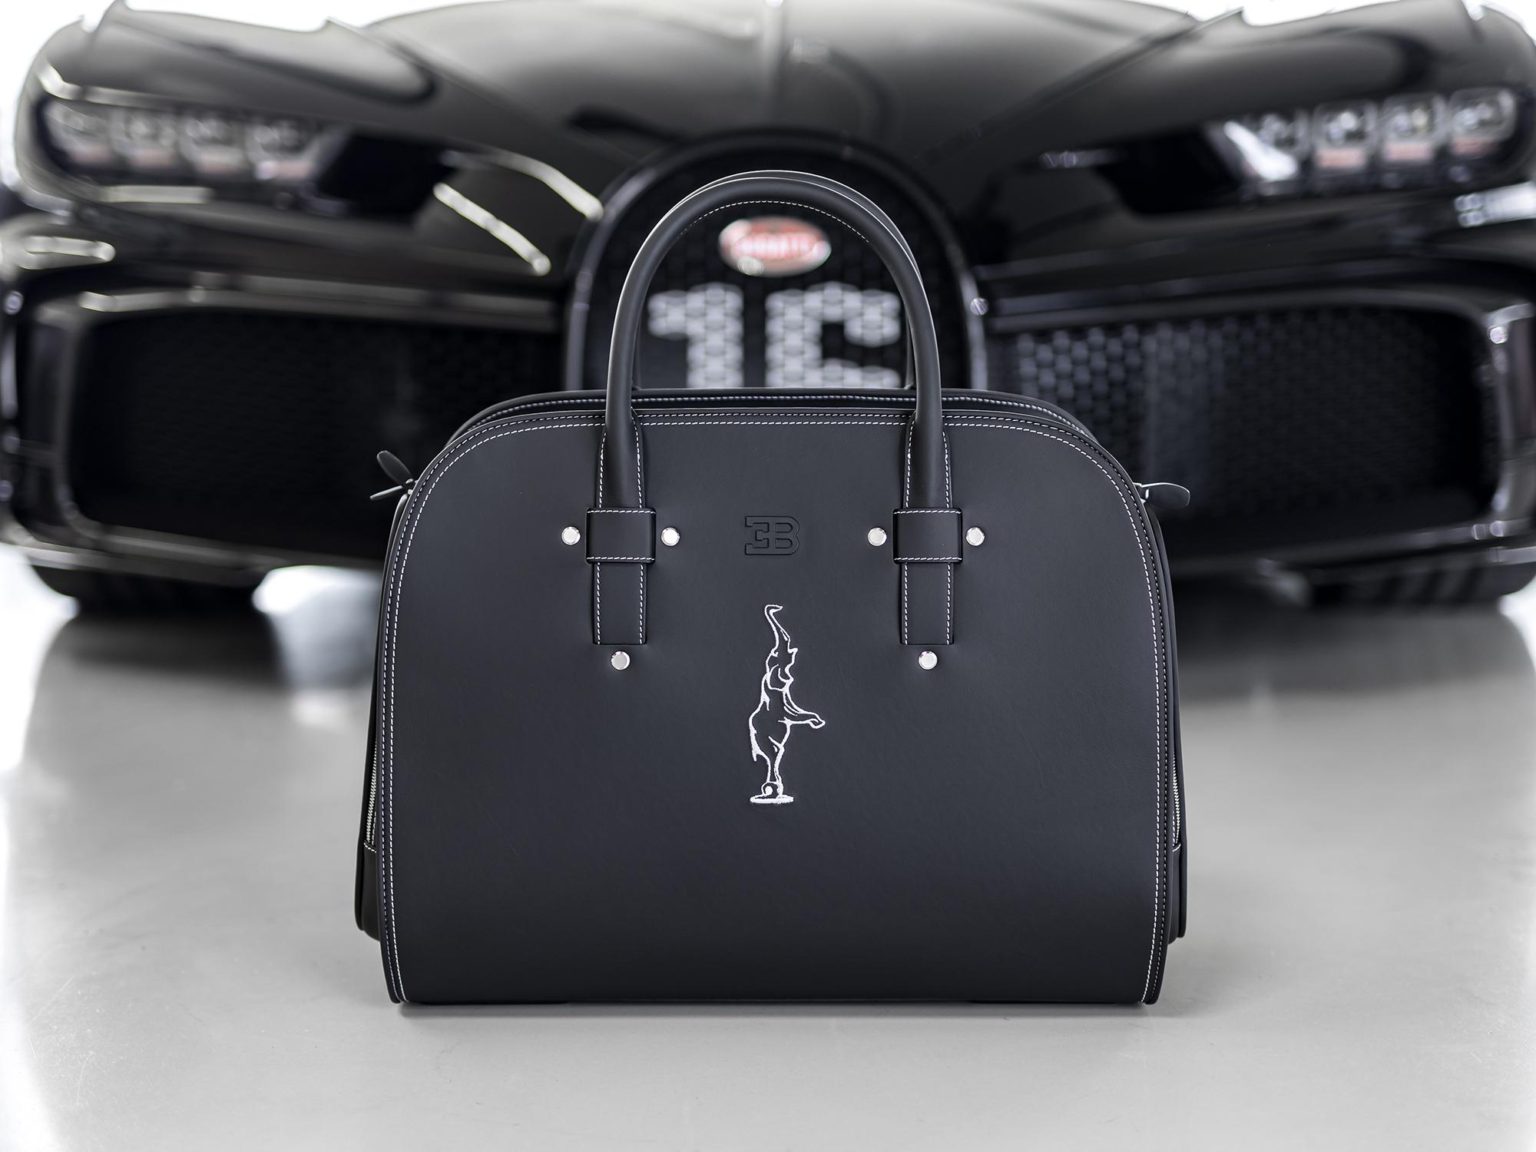 Schedoni has created a three-piece luggage set for Bugatti clients.